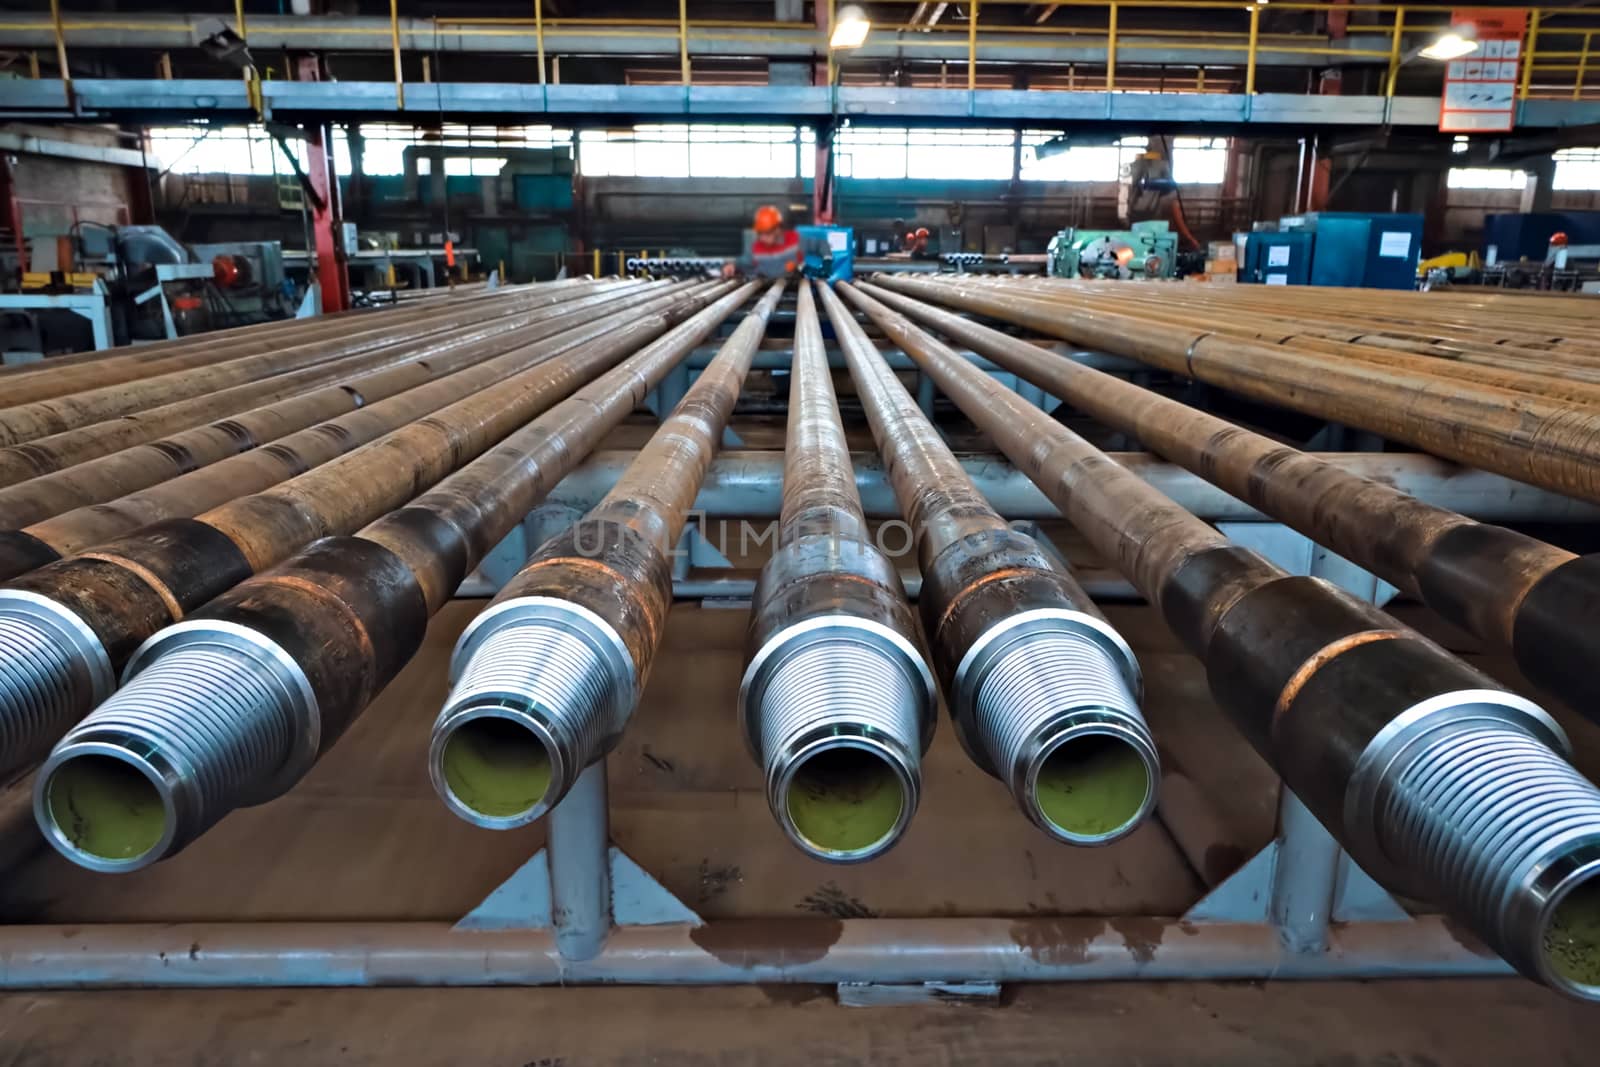 Pumped compressor pipes for oil well. Oil and gas equipment. by DePo